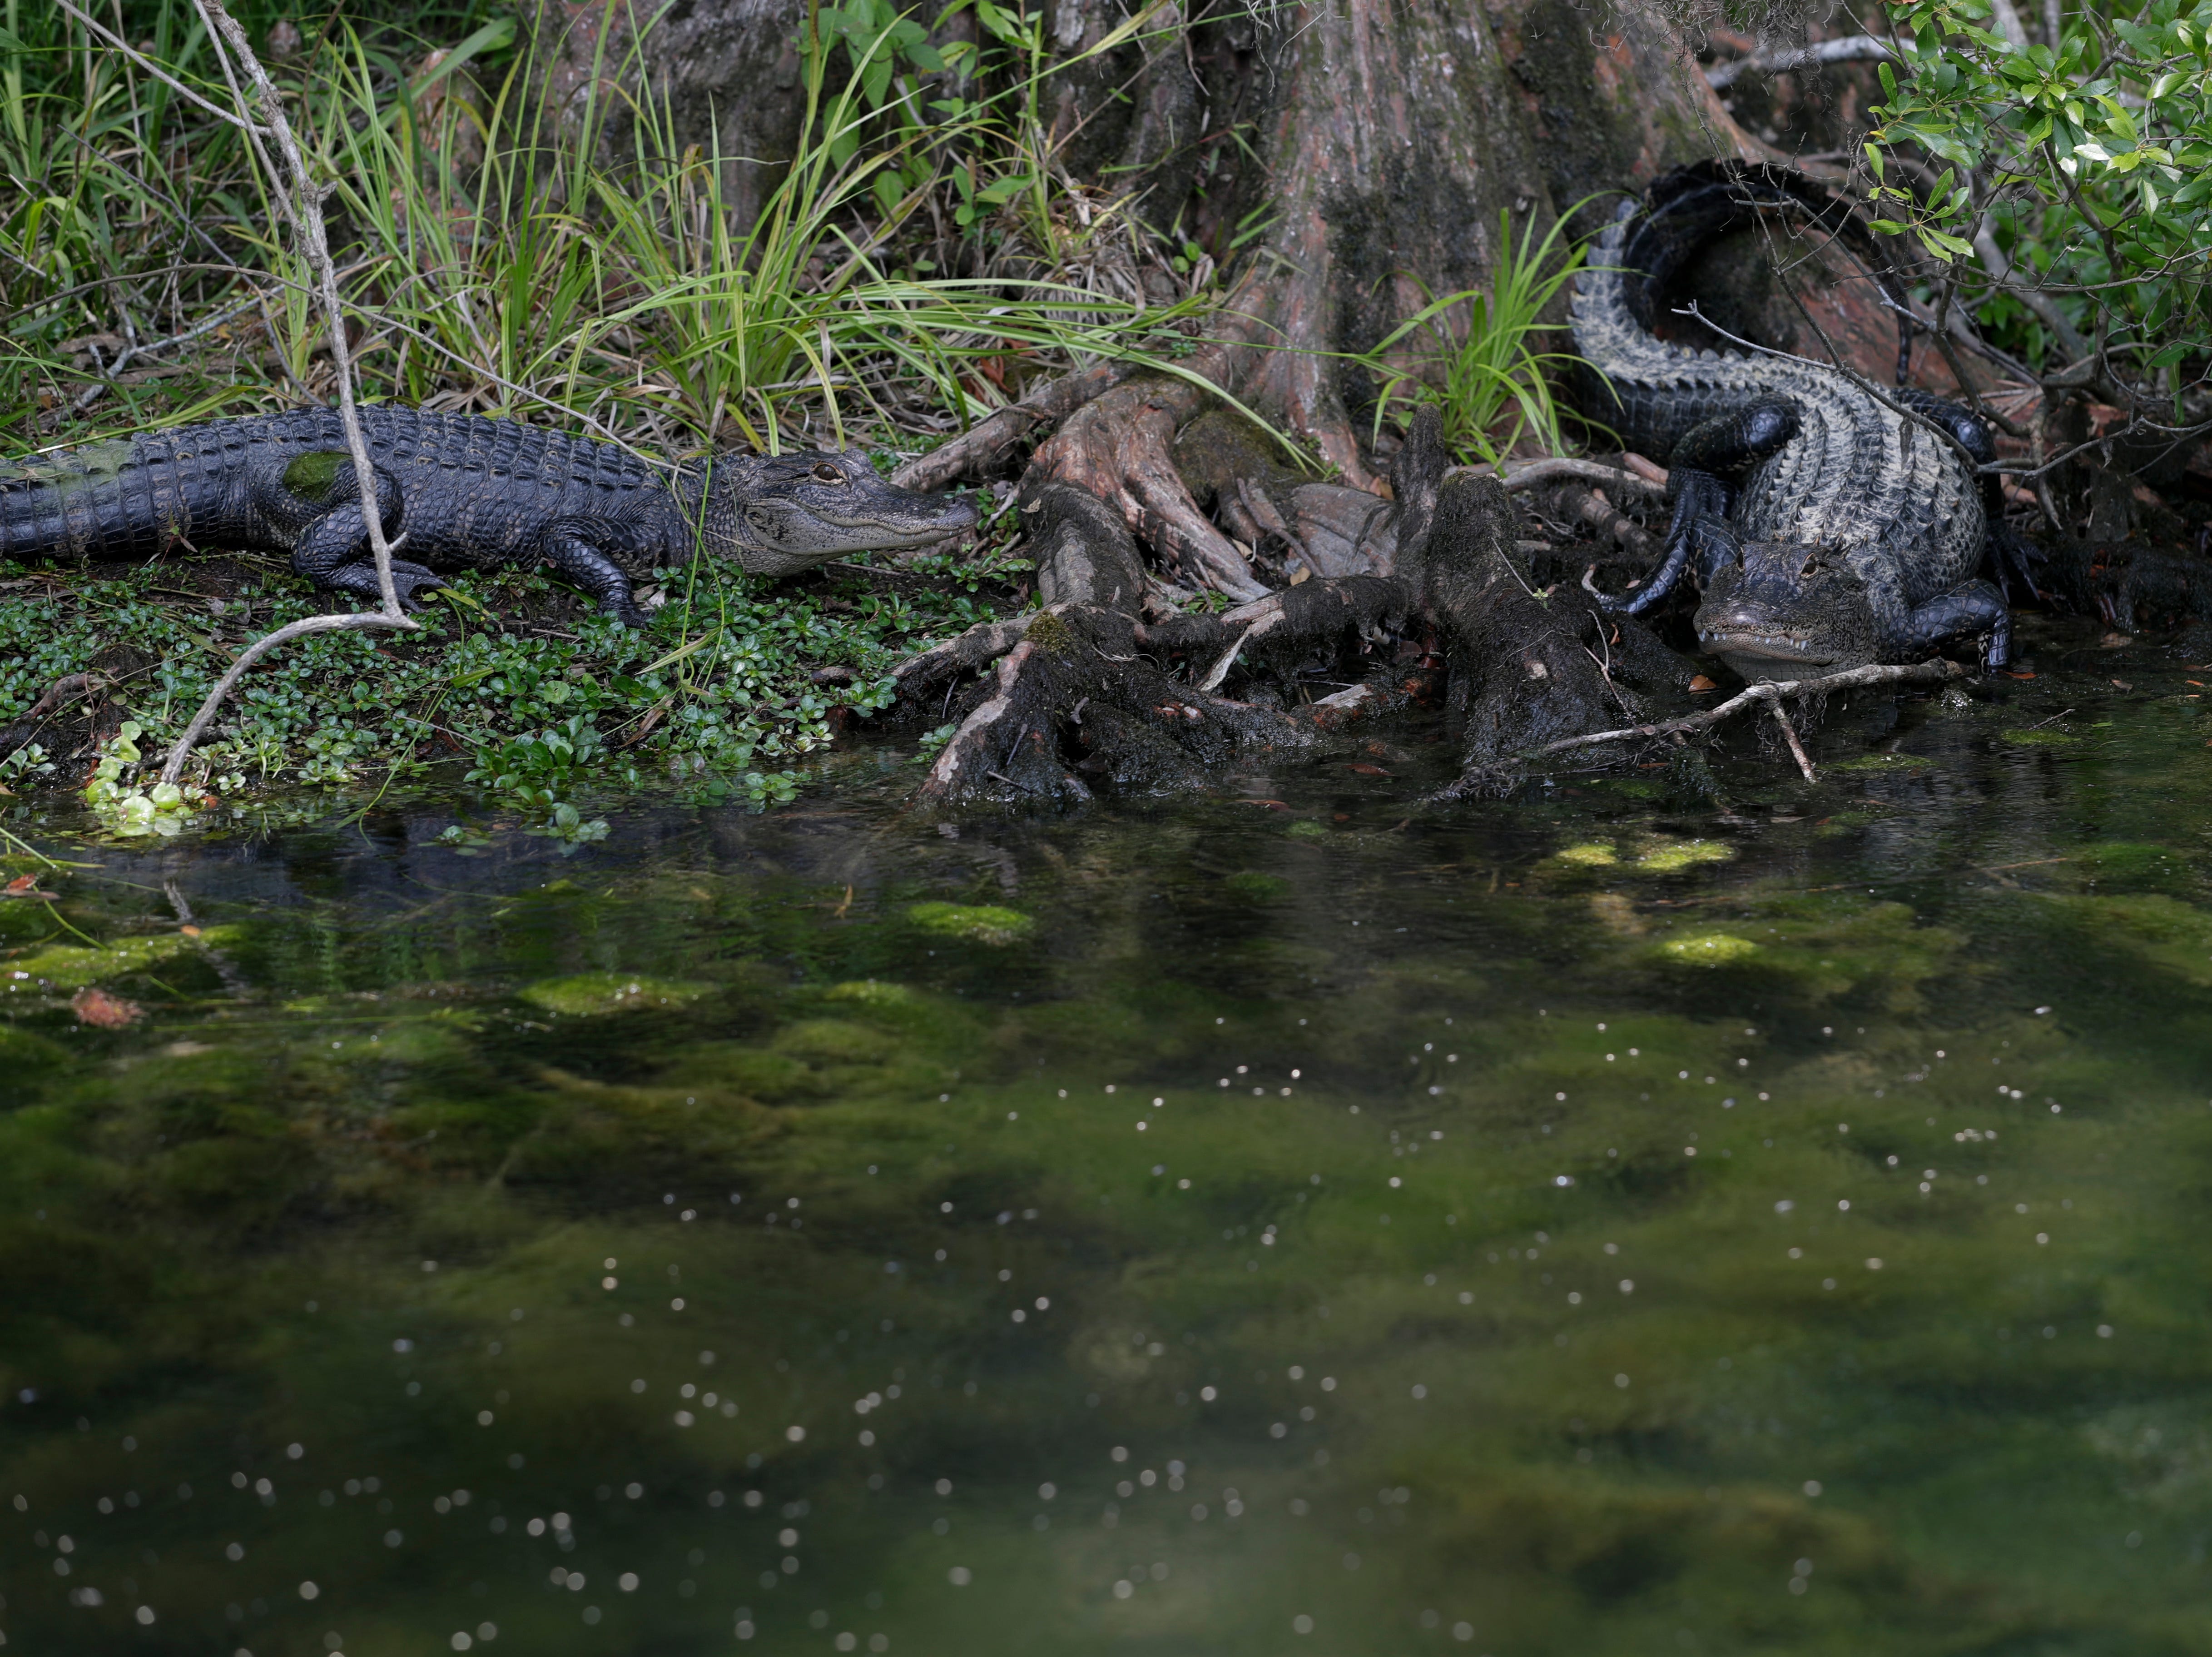 Two alligators hang out at the base of a tree along the shores of Wakulla Springs.